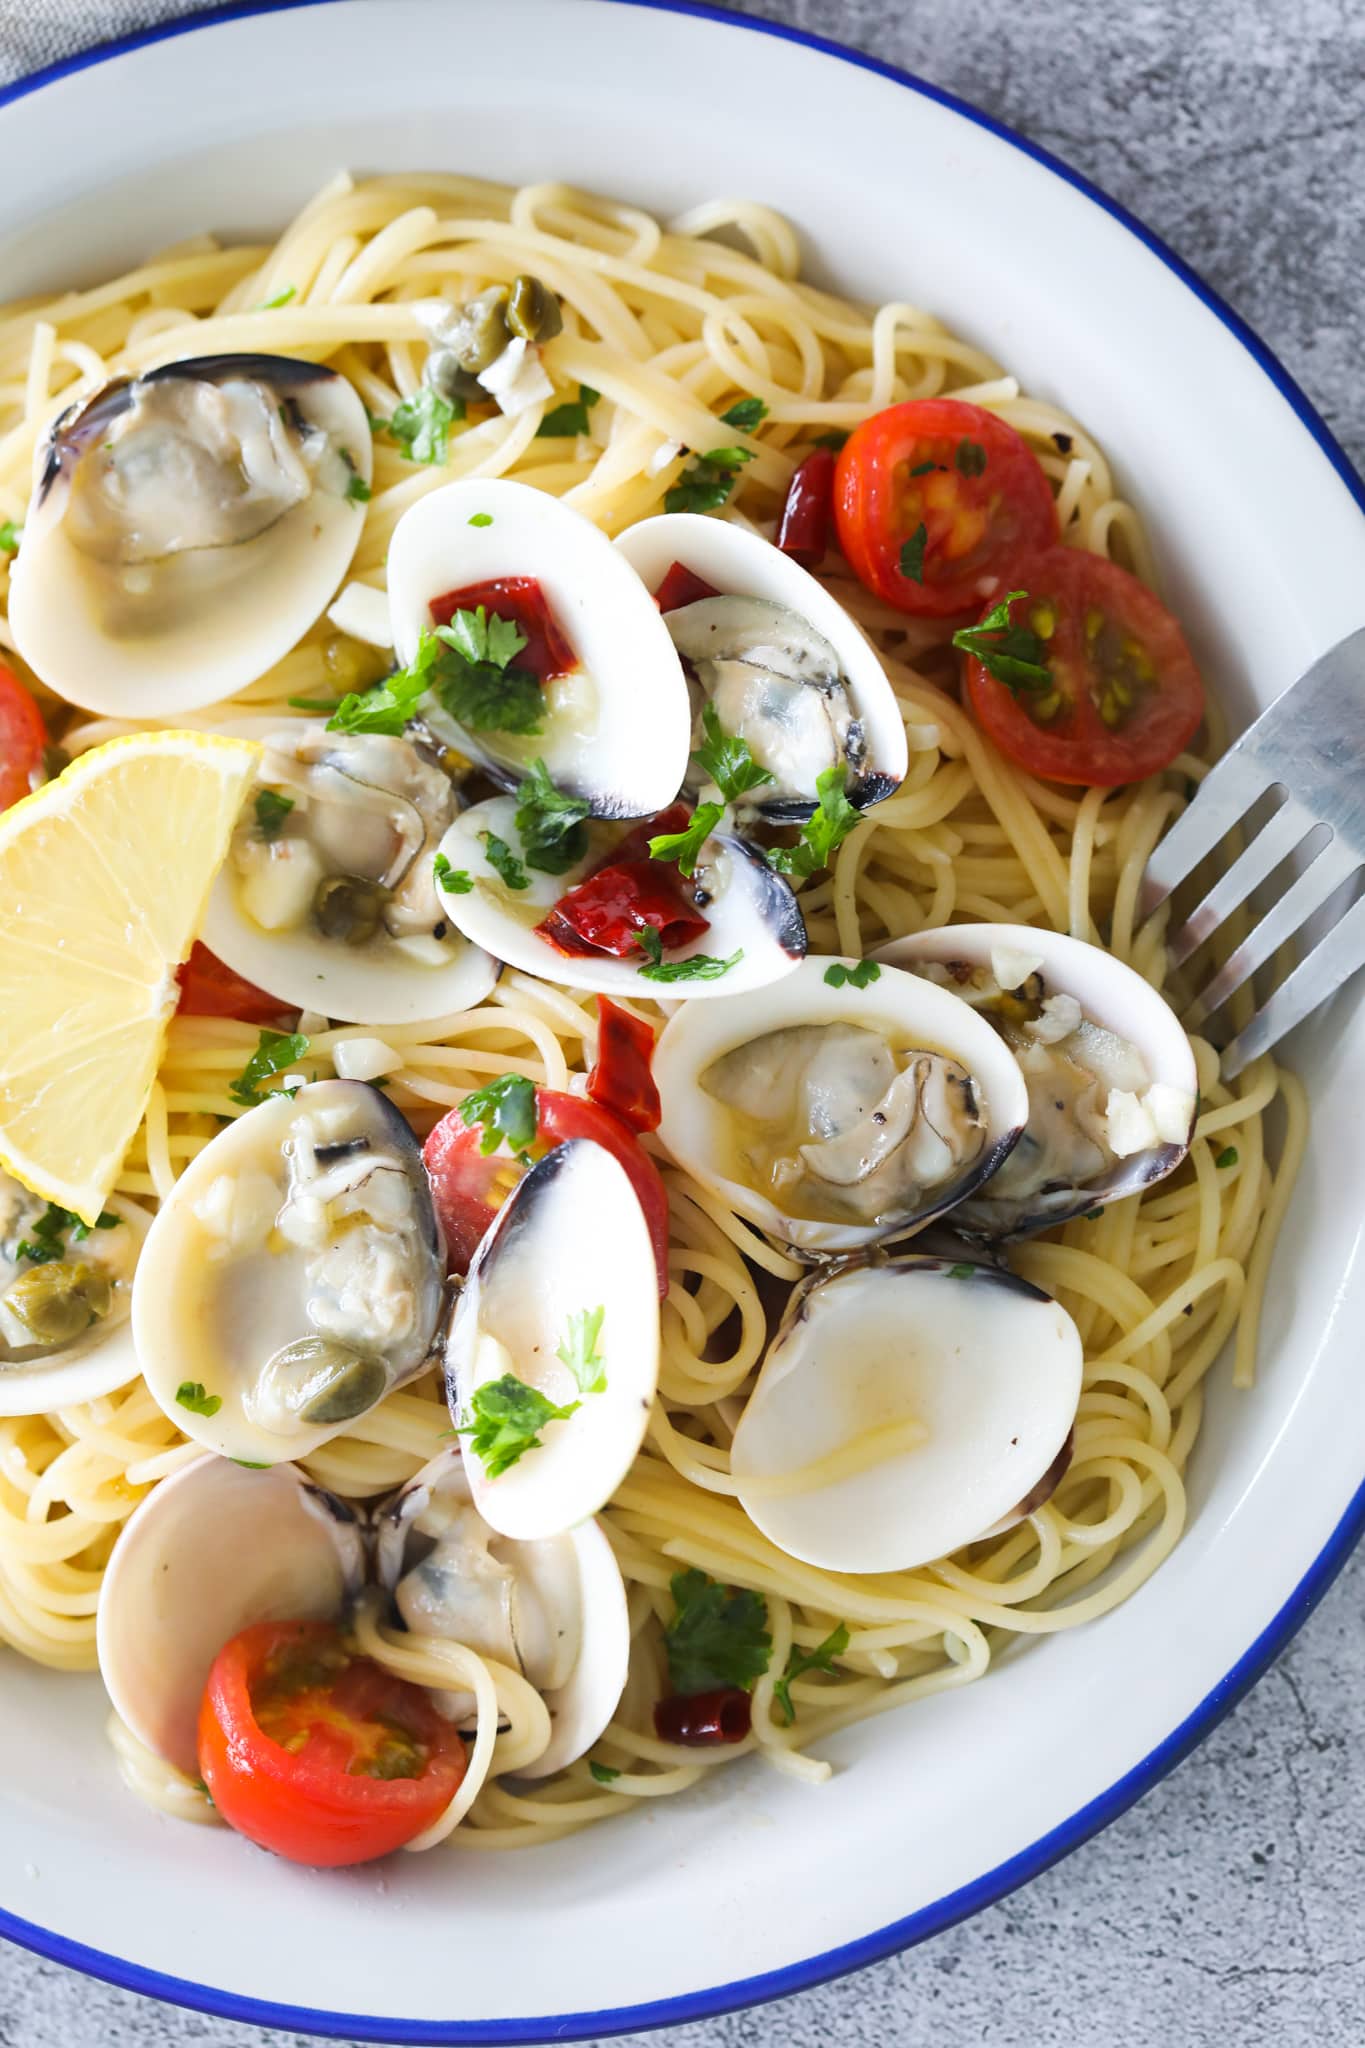 Capellini pasta with tomatoes and clams.